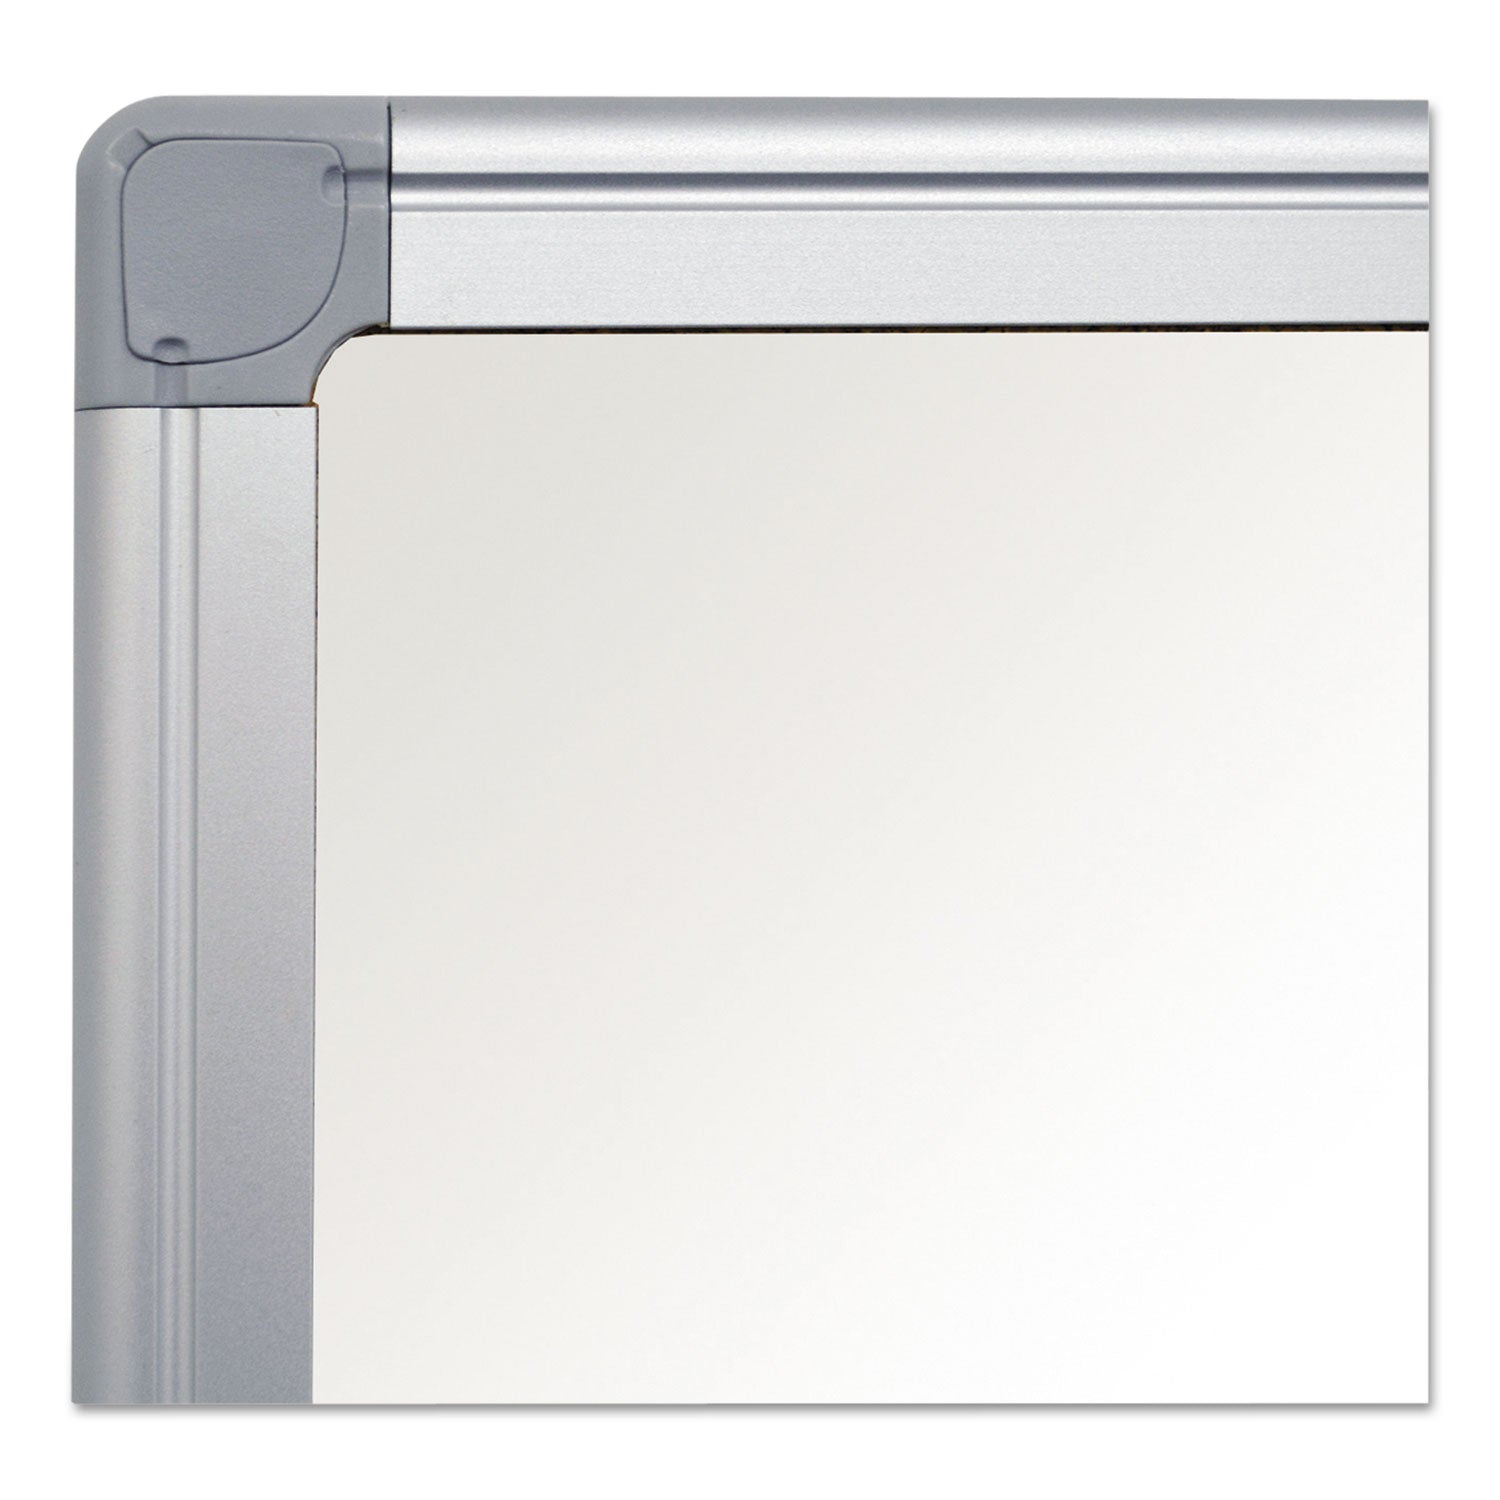 earth-silver-easy-clean-dry-erase-board-36-x-24-white-surface-silver-aluminum-frame_bvccr0620790 - 3